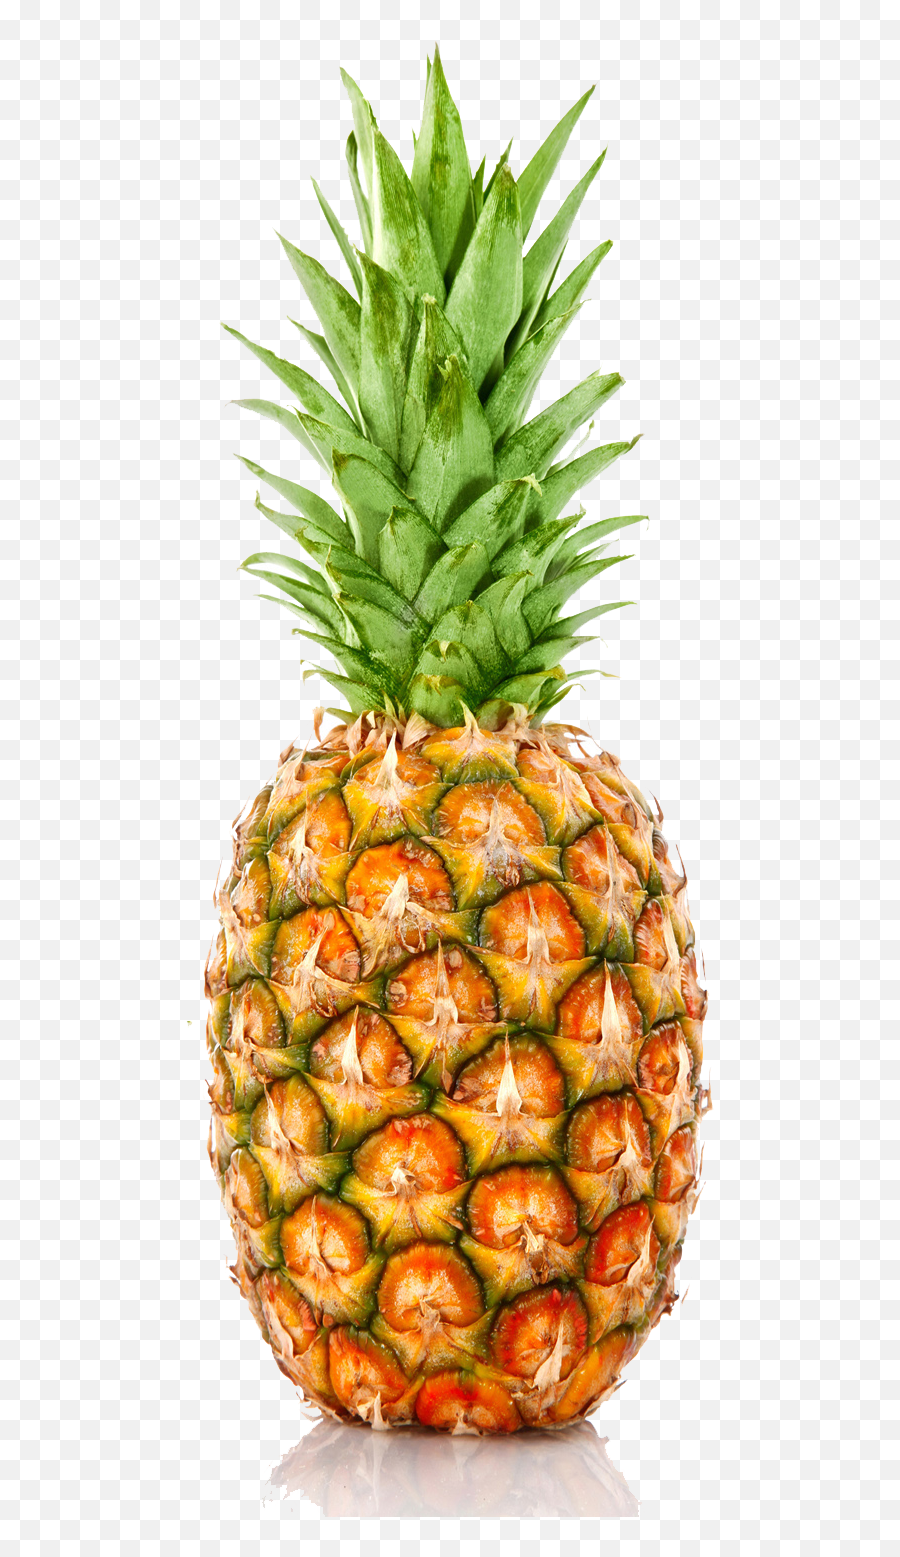 Pineapple Png Transparent Images - Pineapple With Transparent Background,Pineapple Transparent